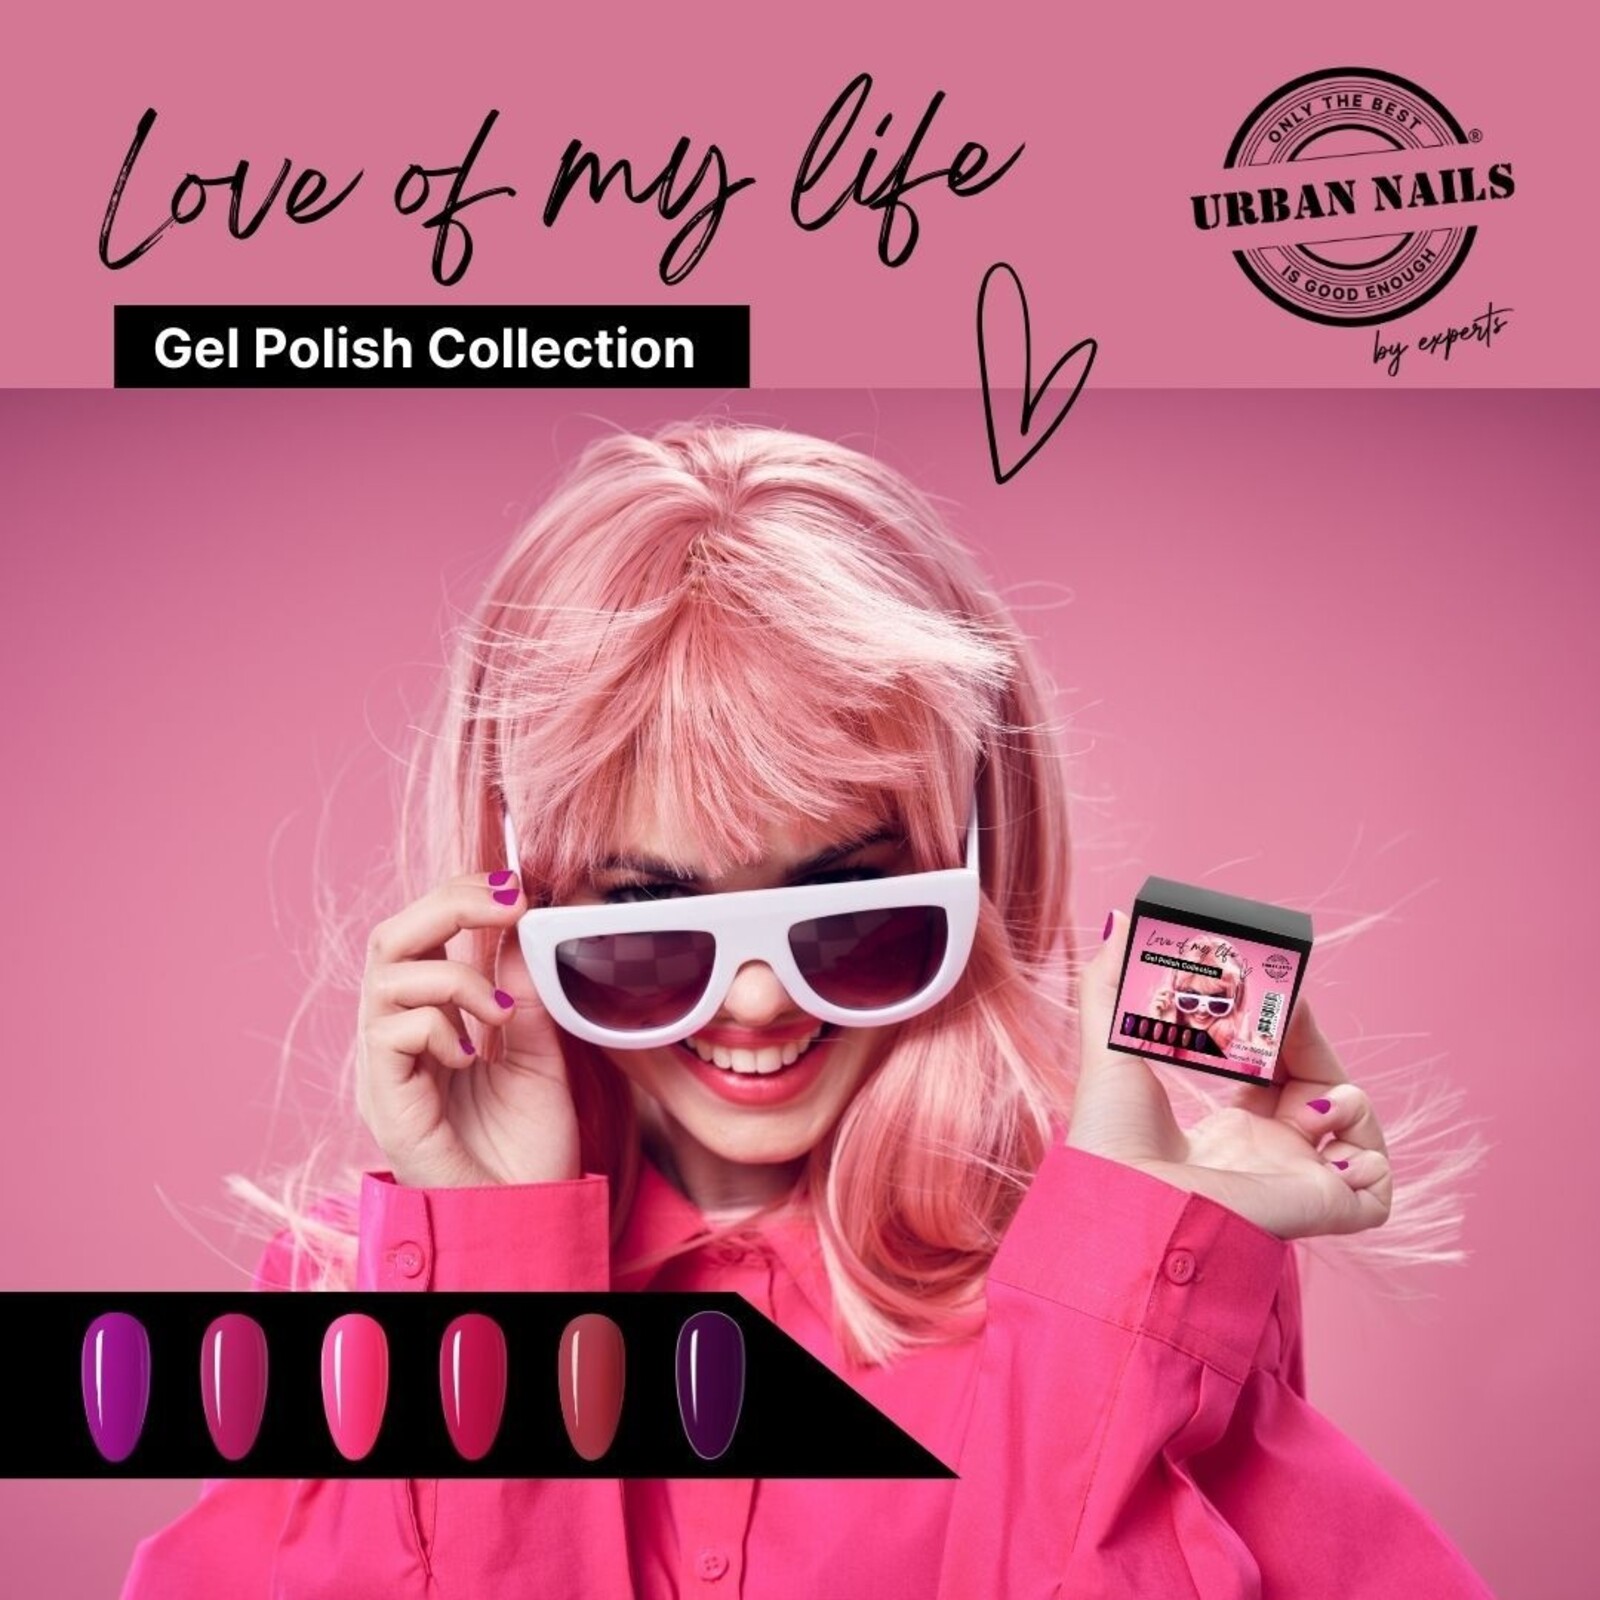 Urban nails Love For Life Gelpolish Collection